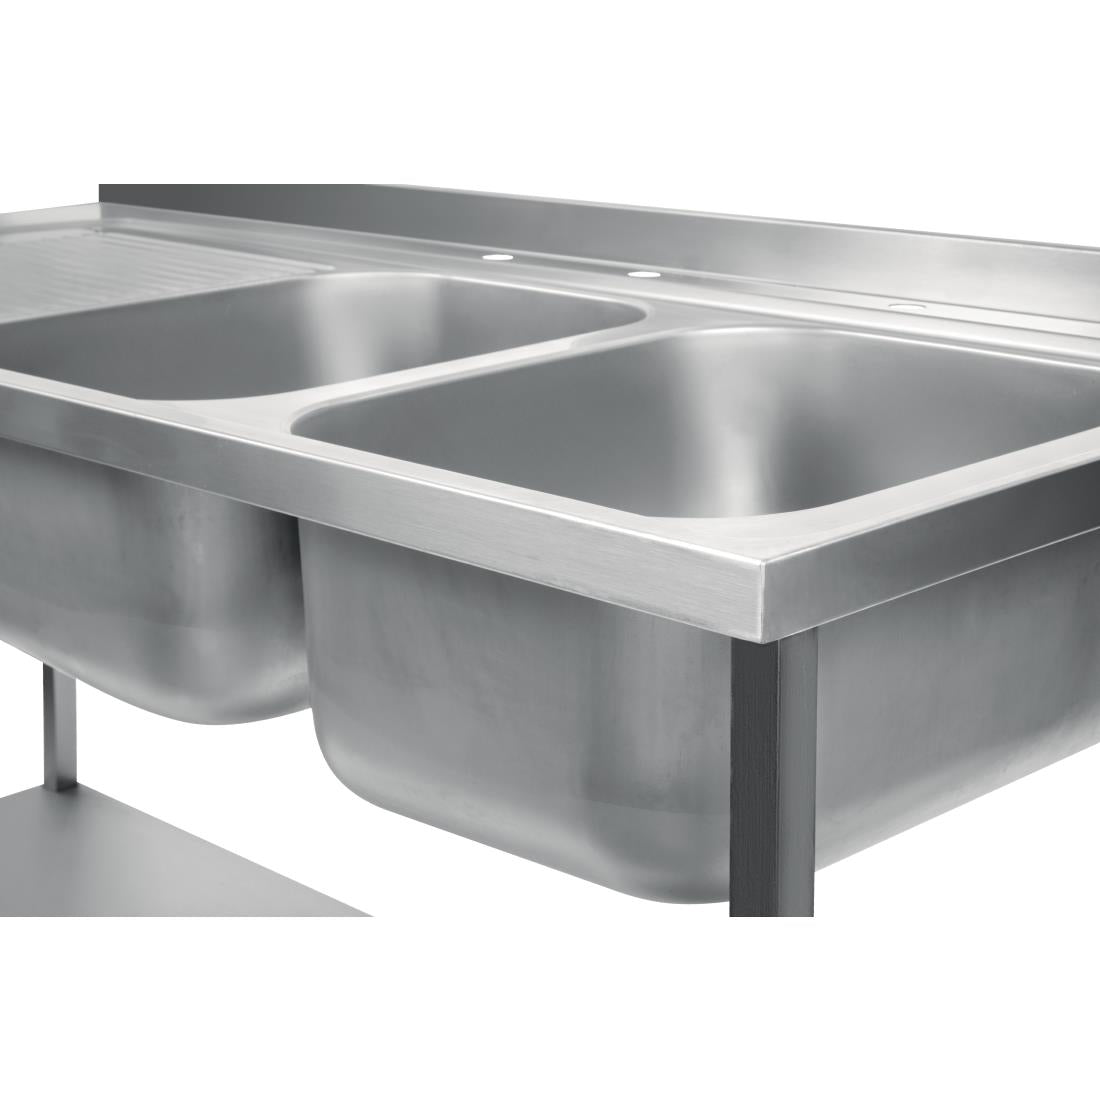 DR395 Holmes Fully Assembled Stainless Steel Sink Left Hand Drainer 1800mm JD Catering Equipment Solutions Ltd